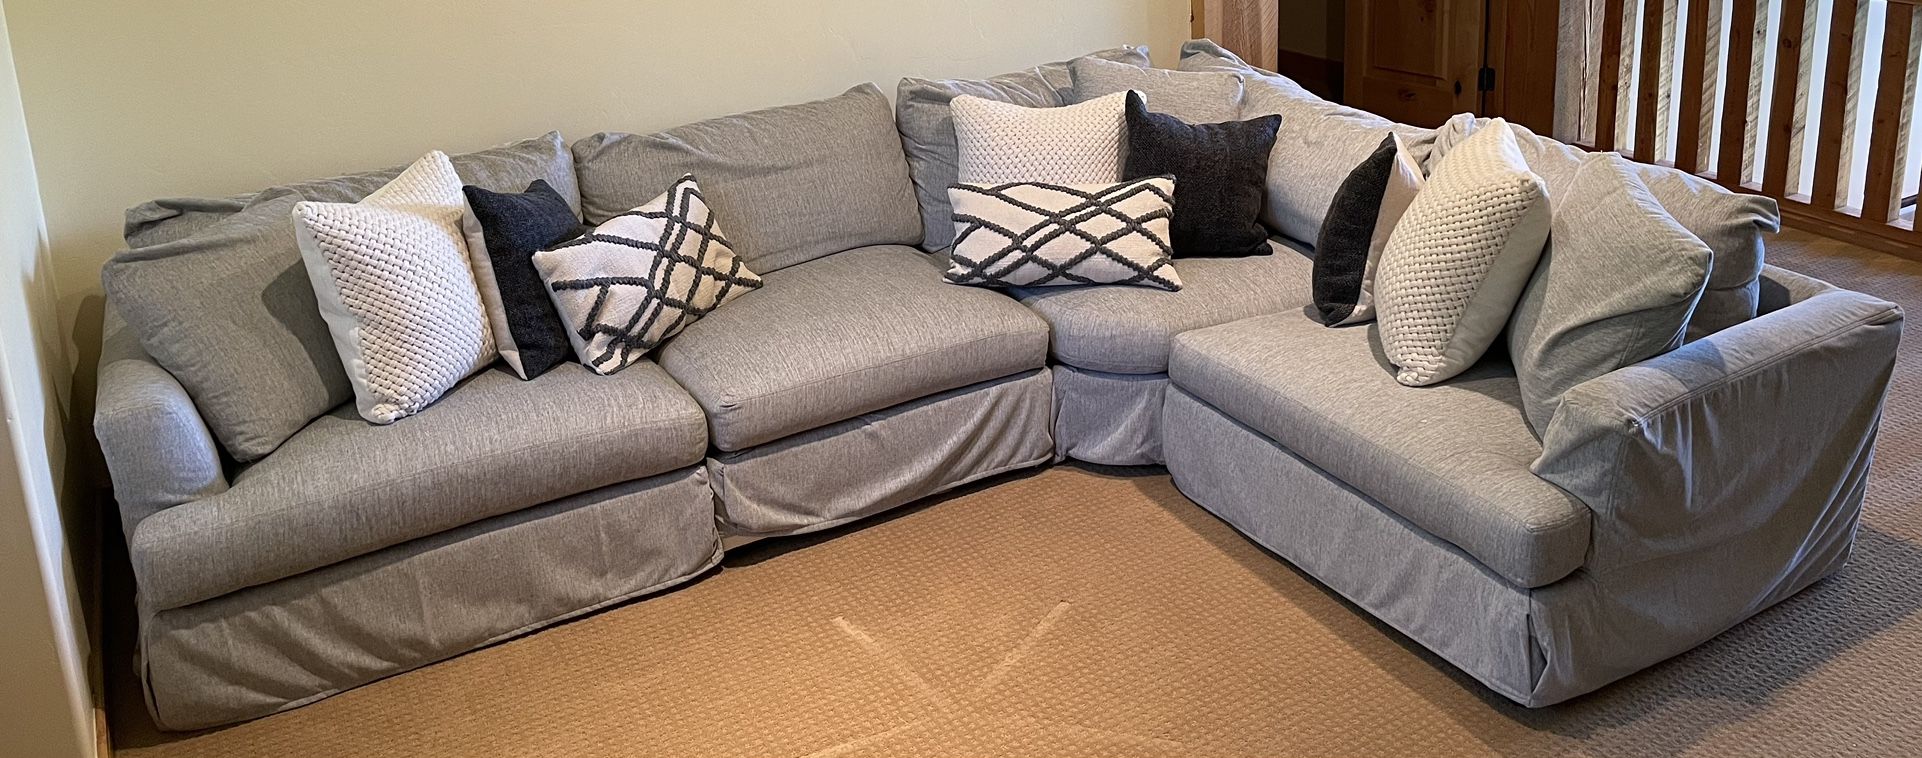 4 Piece Chenille Fog (Gray) Deep Seat Slipcovered Wedge Sectional with Down Blend Wrapped Cushions and Throw Pillows